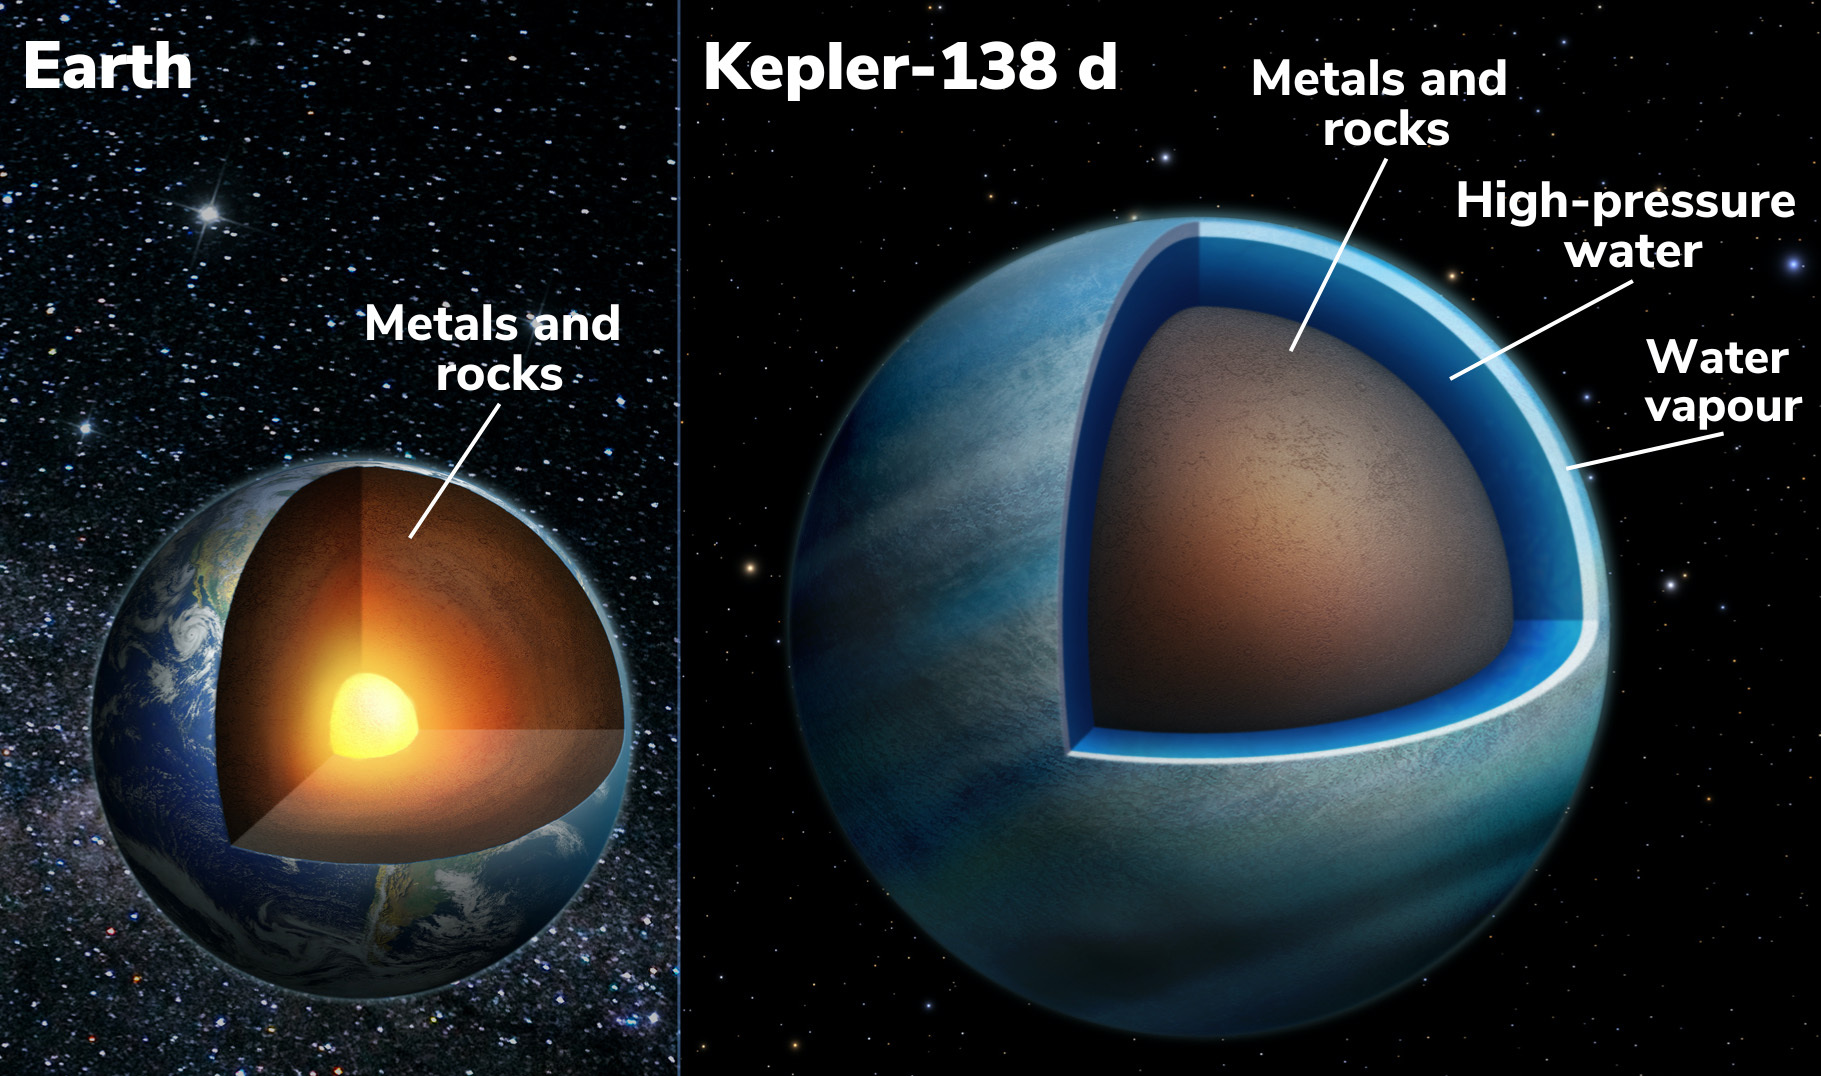 Left: a cross section of Earth showing its interior. Right: a cross section of the blue world, Kepler-138 d with a brown core (rocks &amp; metal) below a dark blue high-pressure water layer that is below a light blue water vapor envelope.